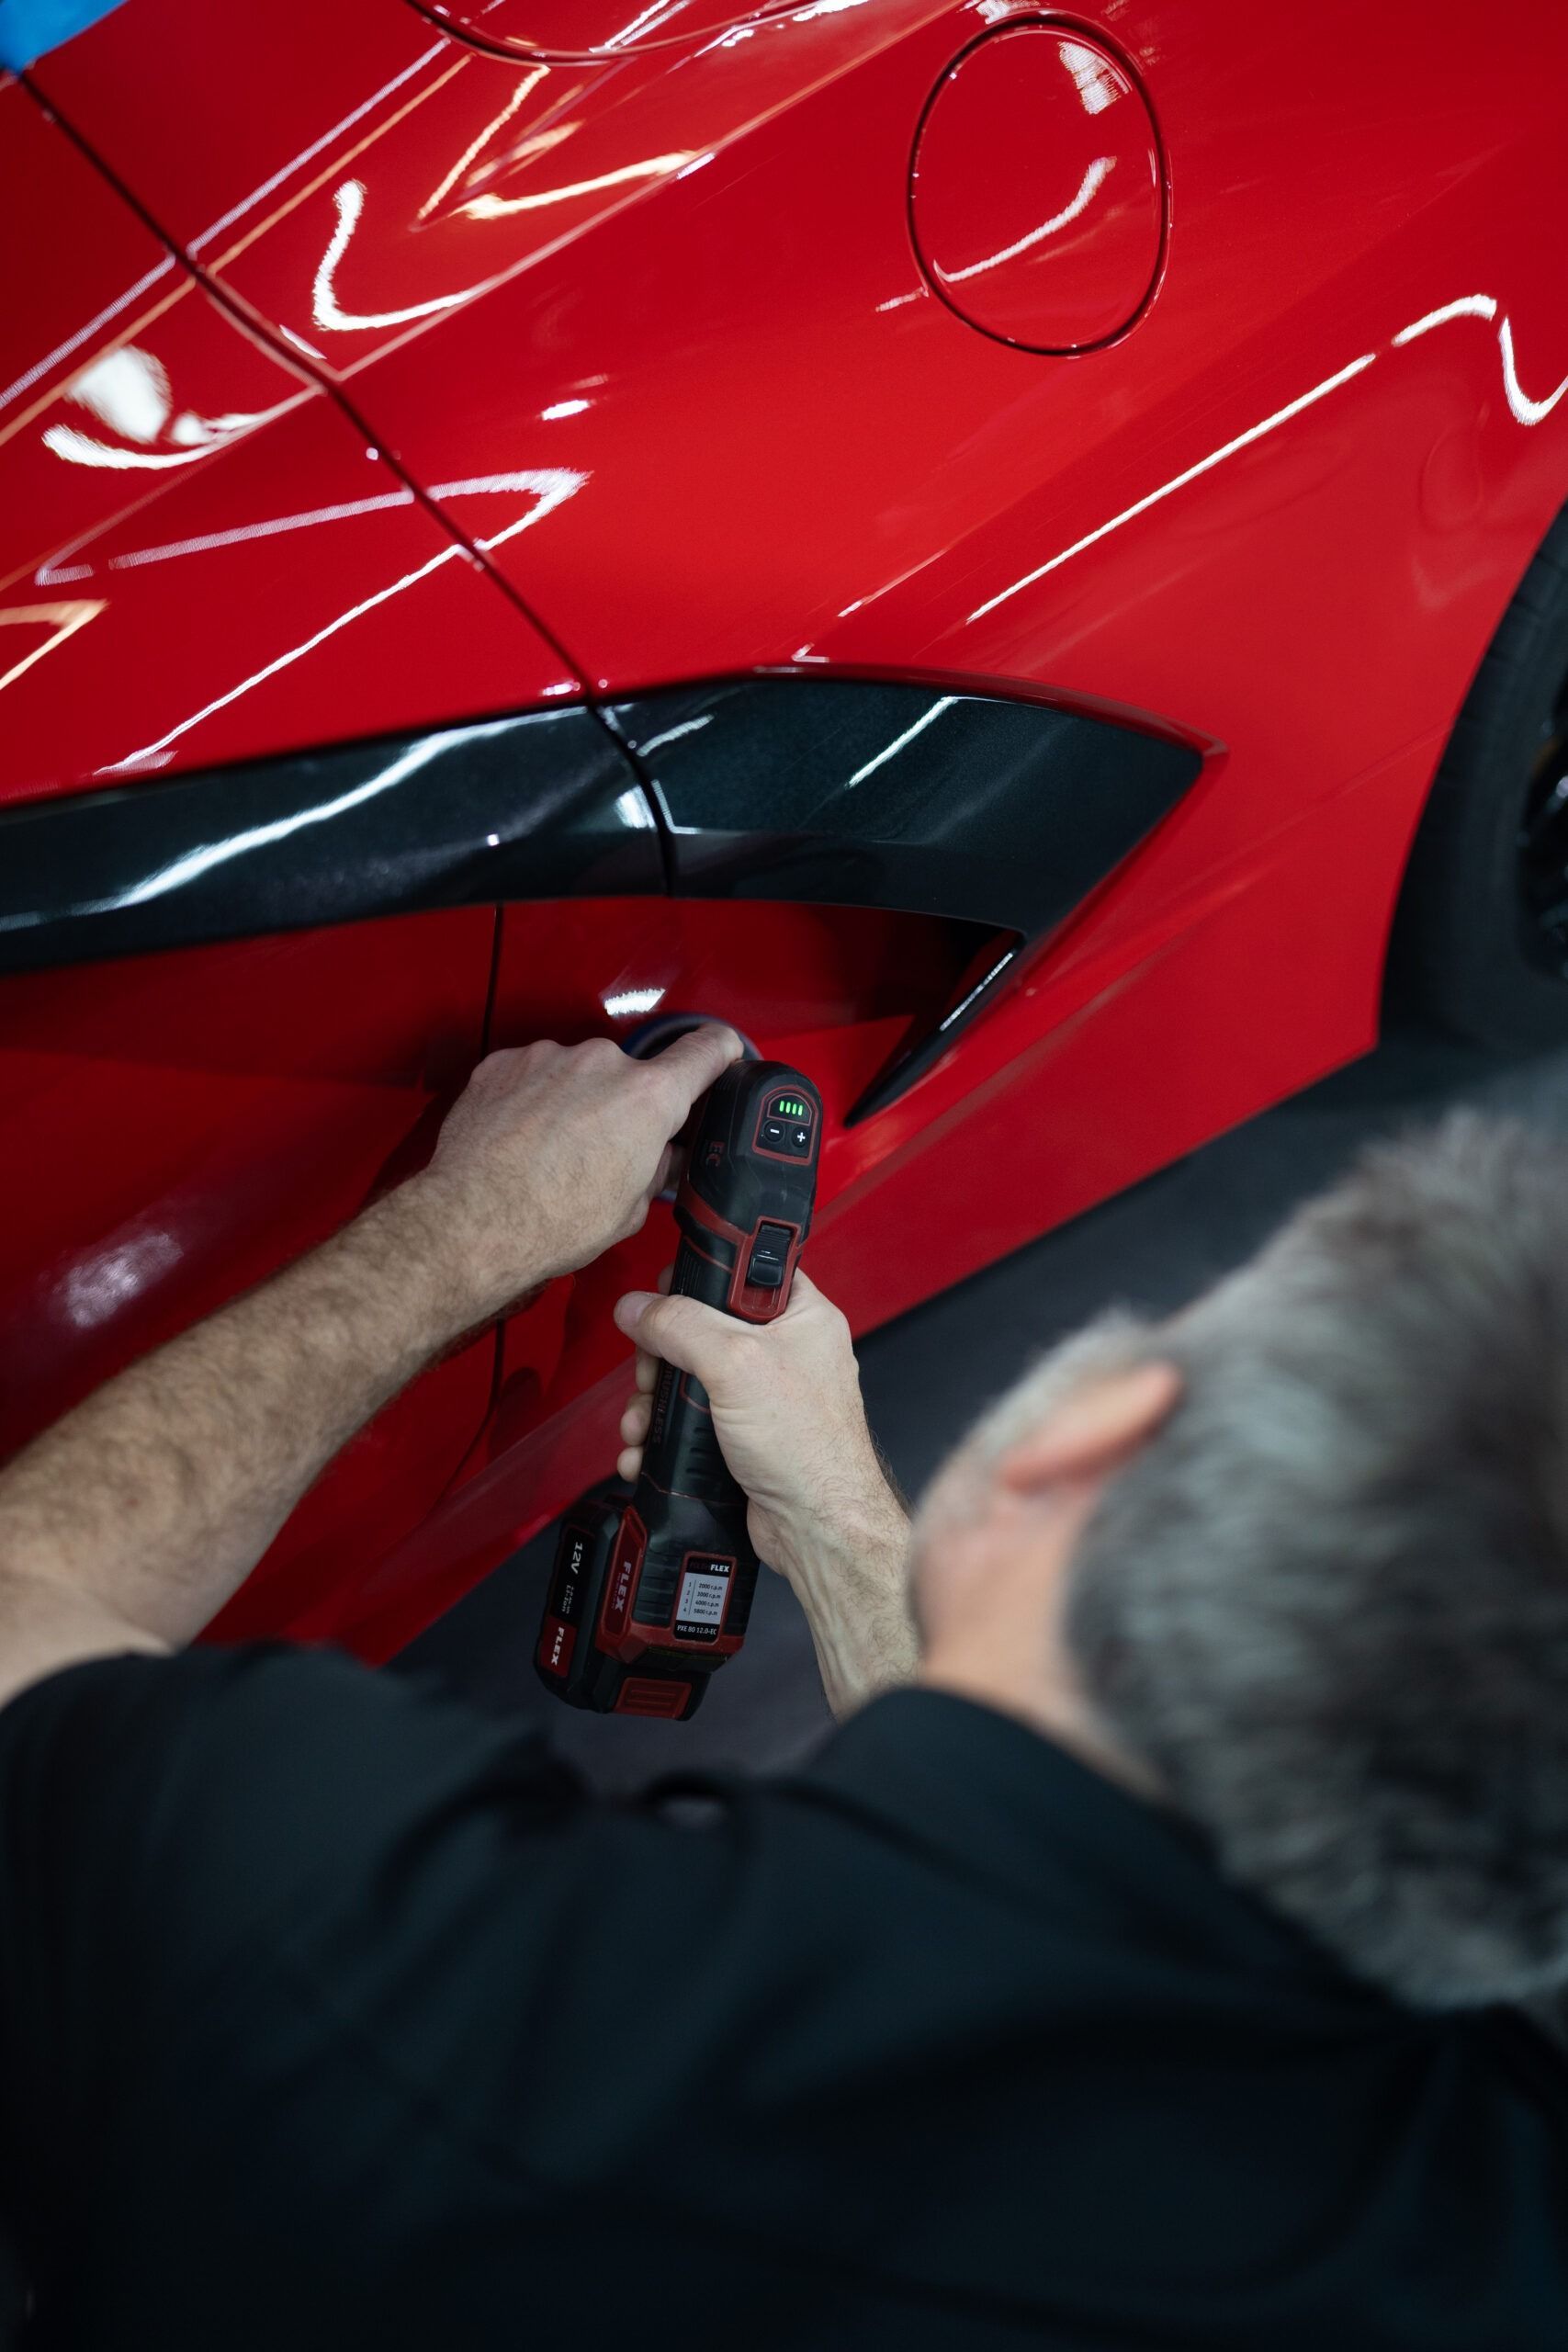 A man is working on a red car with a drill